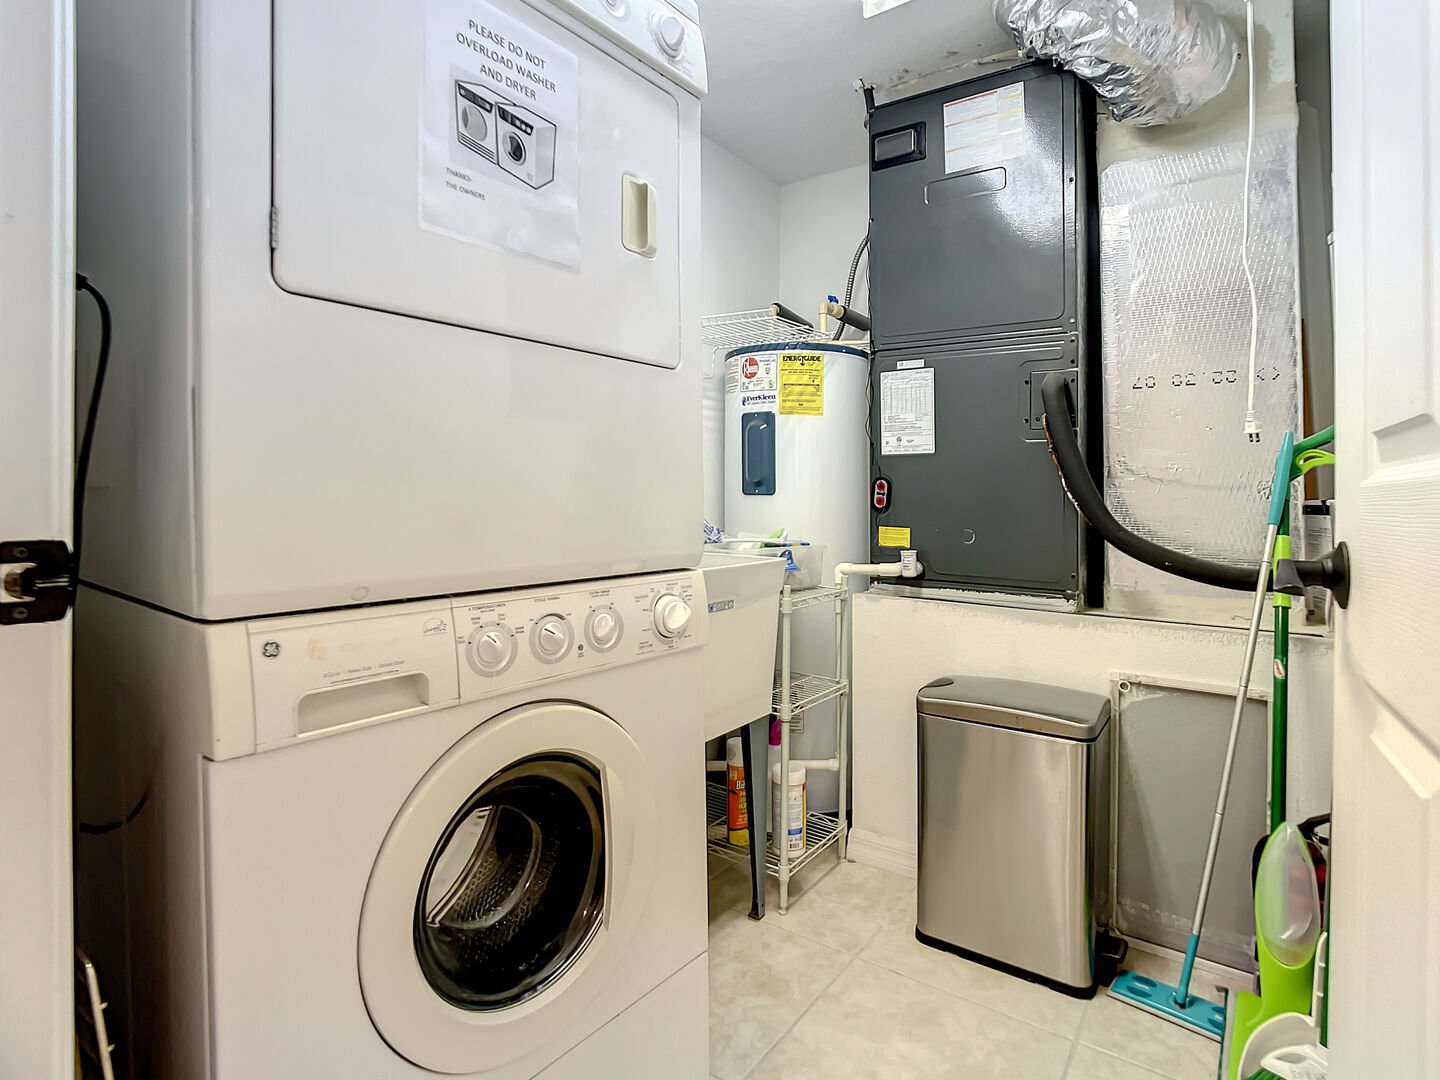 Full sized washer and dryer in the laundry room.